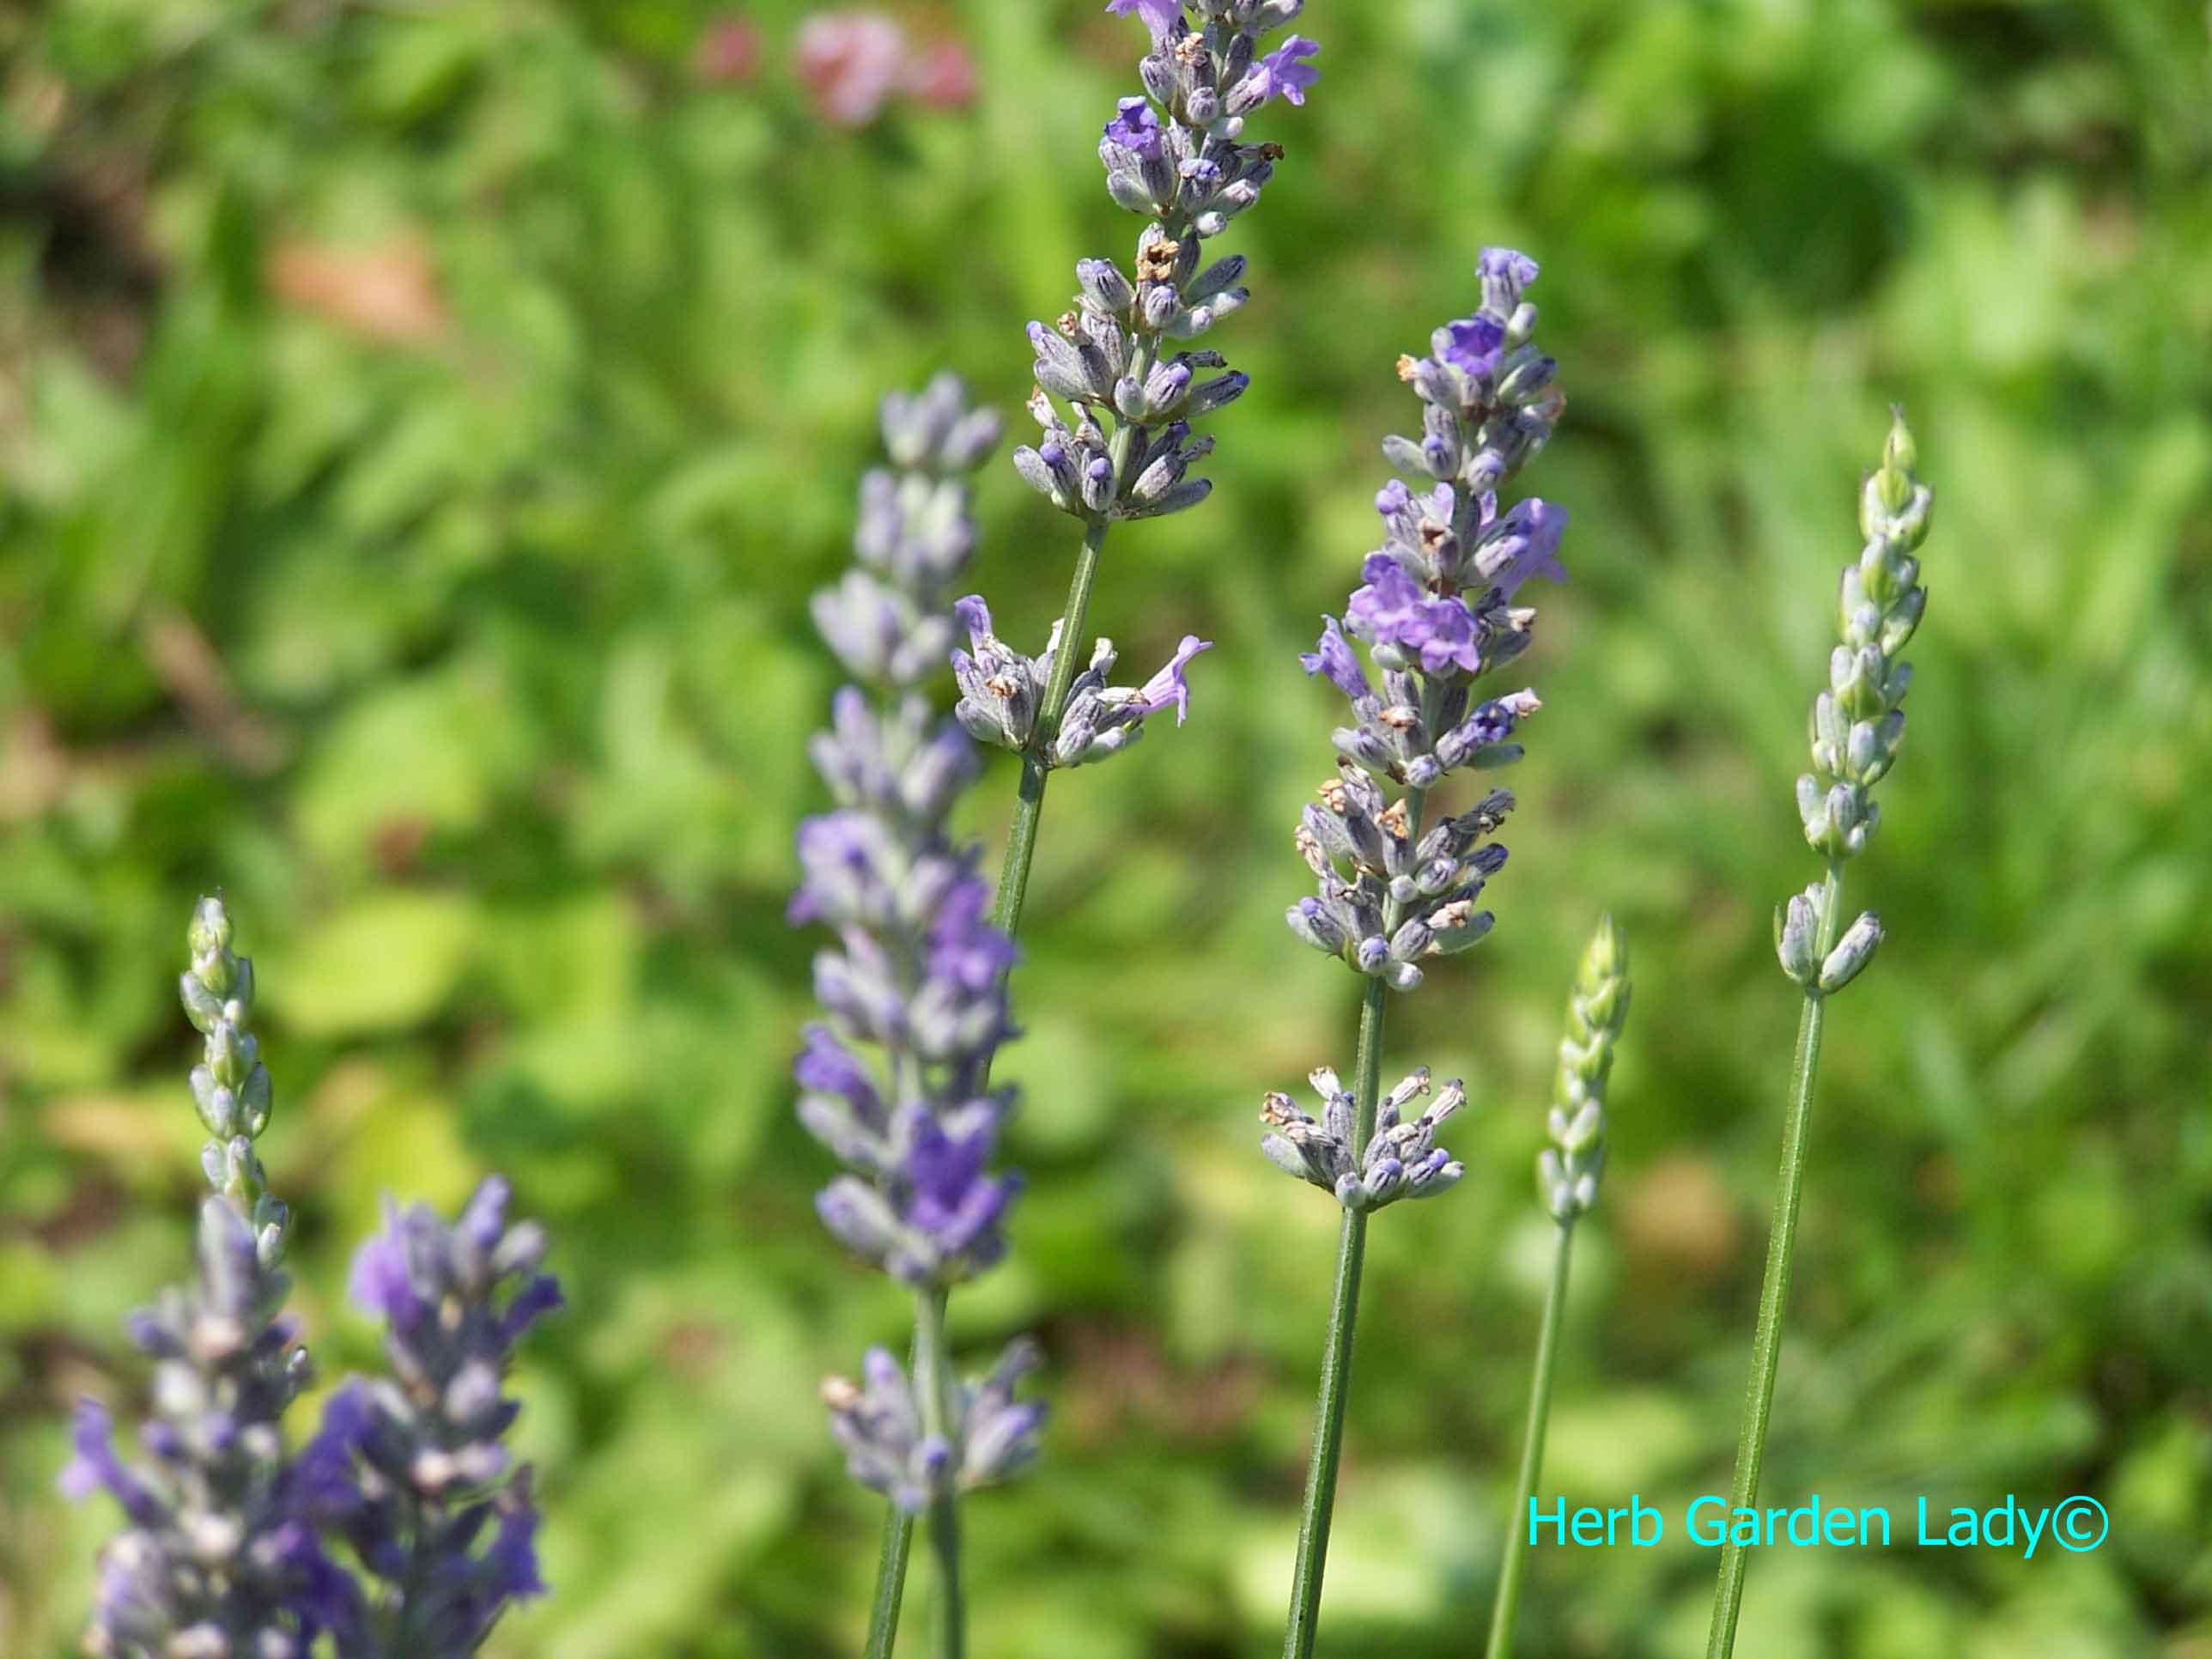 Lavender is an excellent herb for an aromatherapy garden design